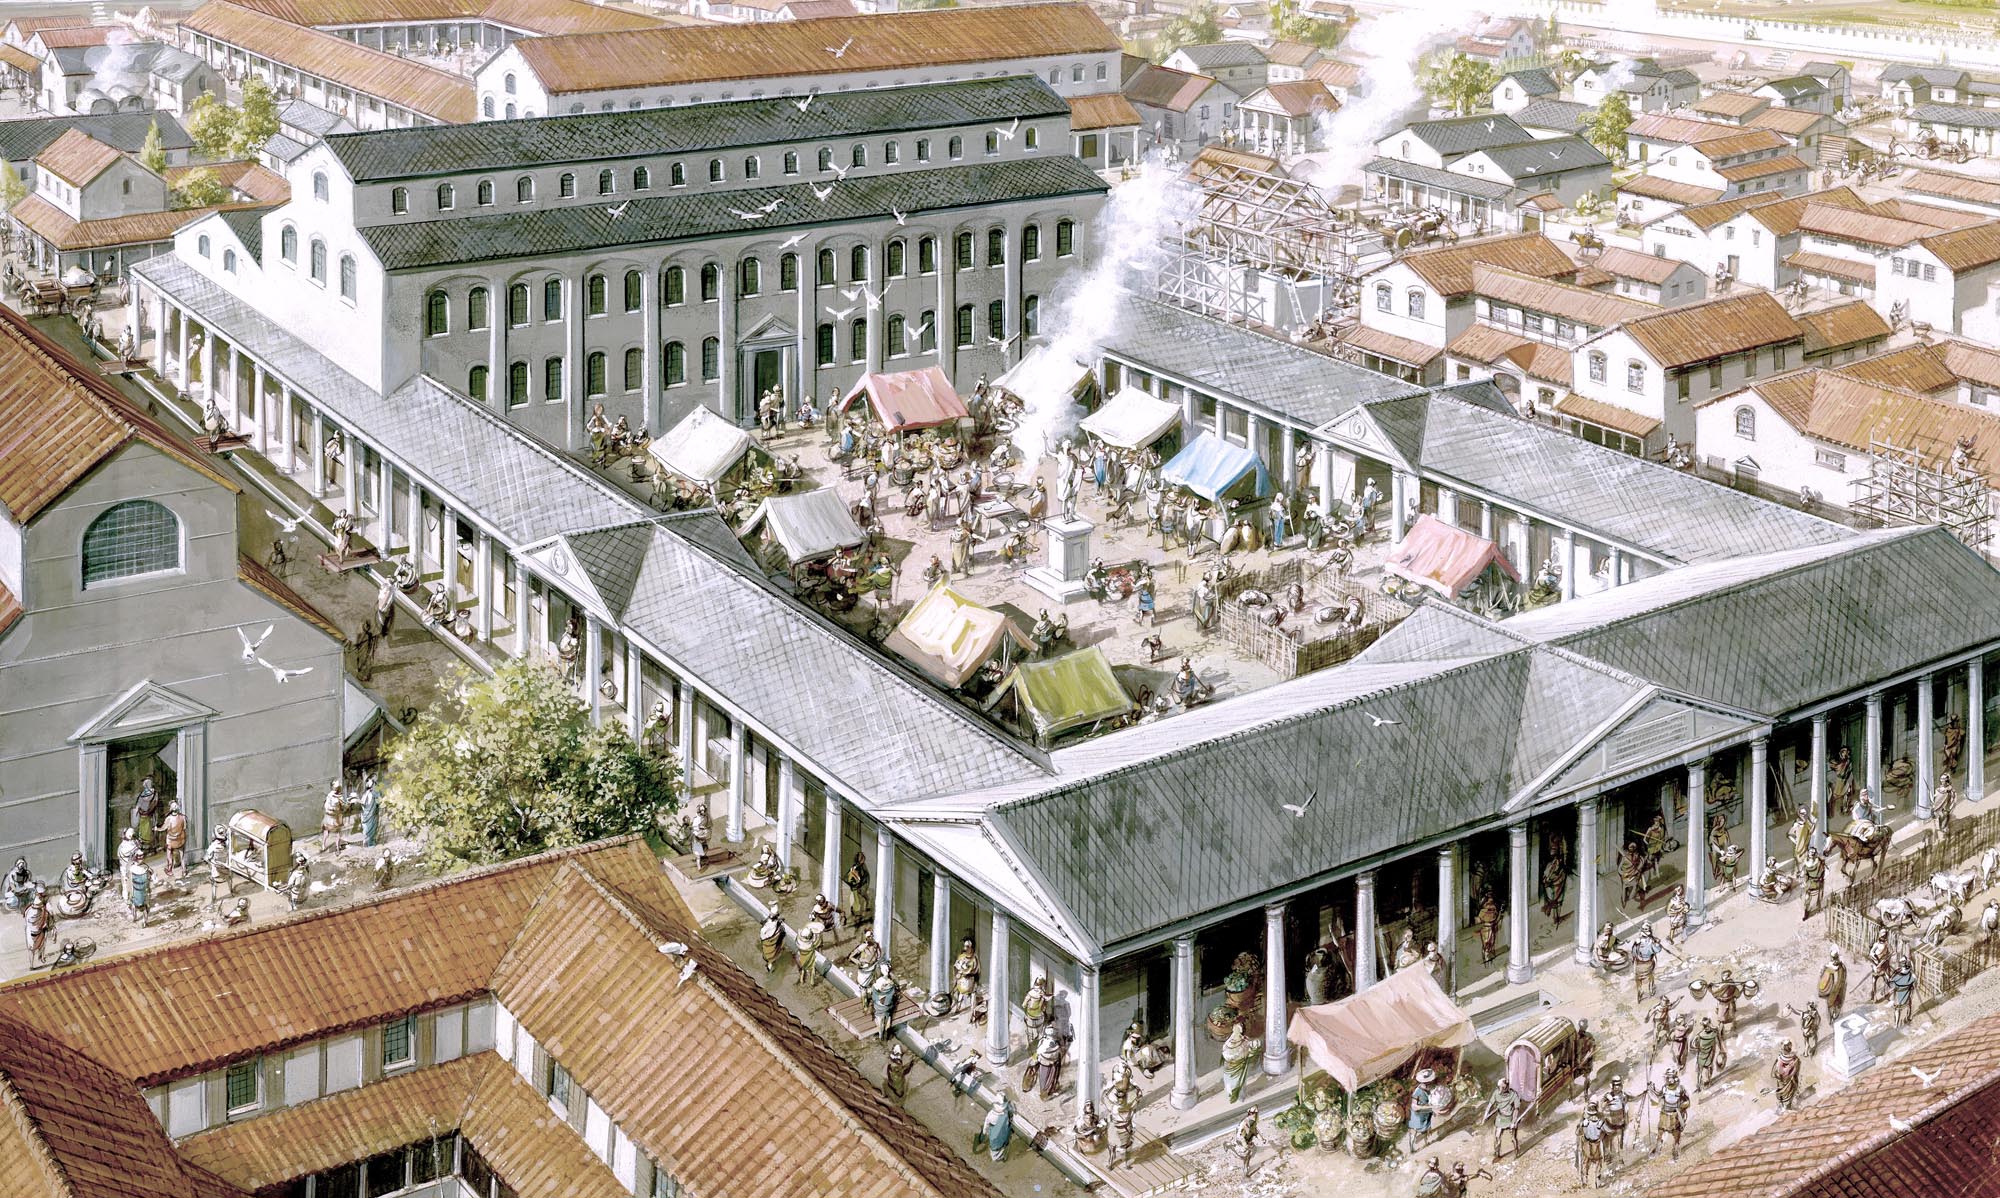 The Roman Forum and Basilica as they may have looked from the south-west during the early 3rd century CE - Mike Codd / Leicester Arts and Museums Service